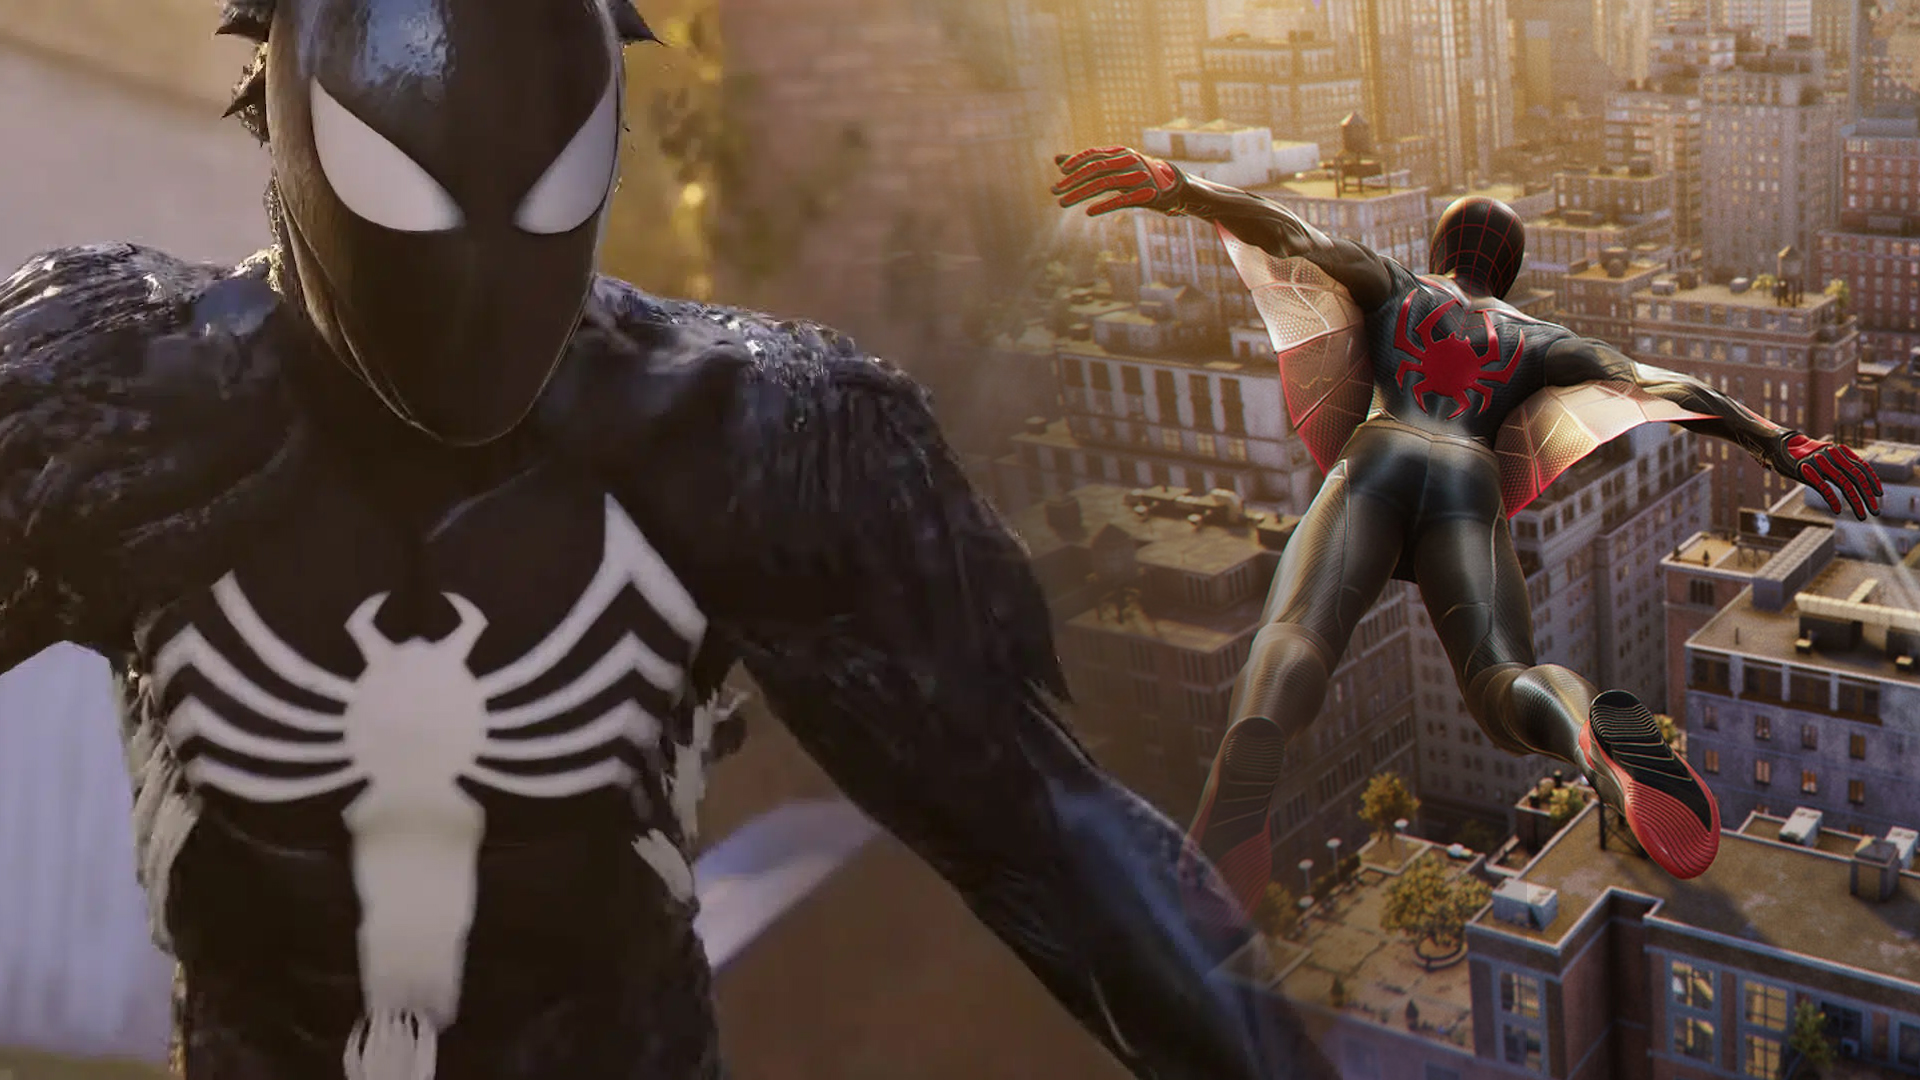 Spider-Man 2 Launching in September with “Massive Publicity” in